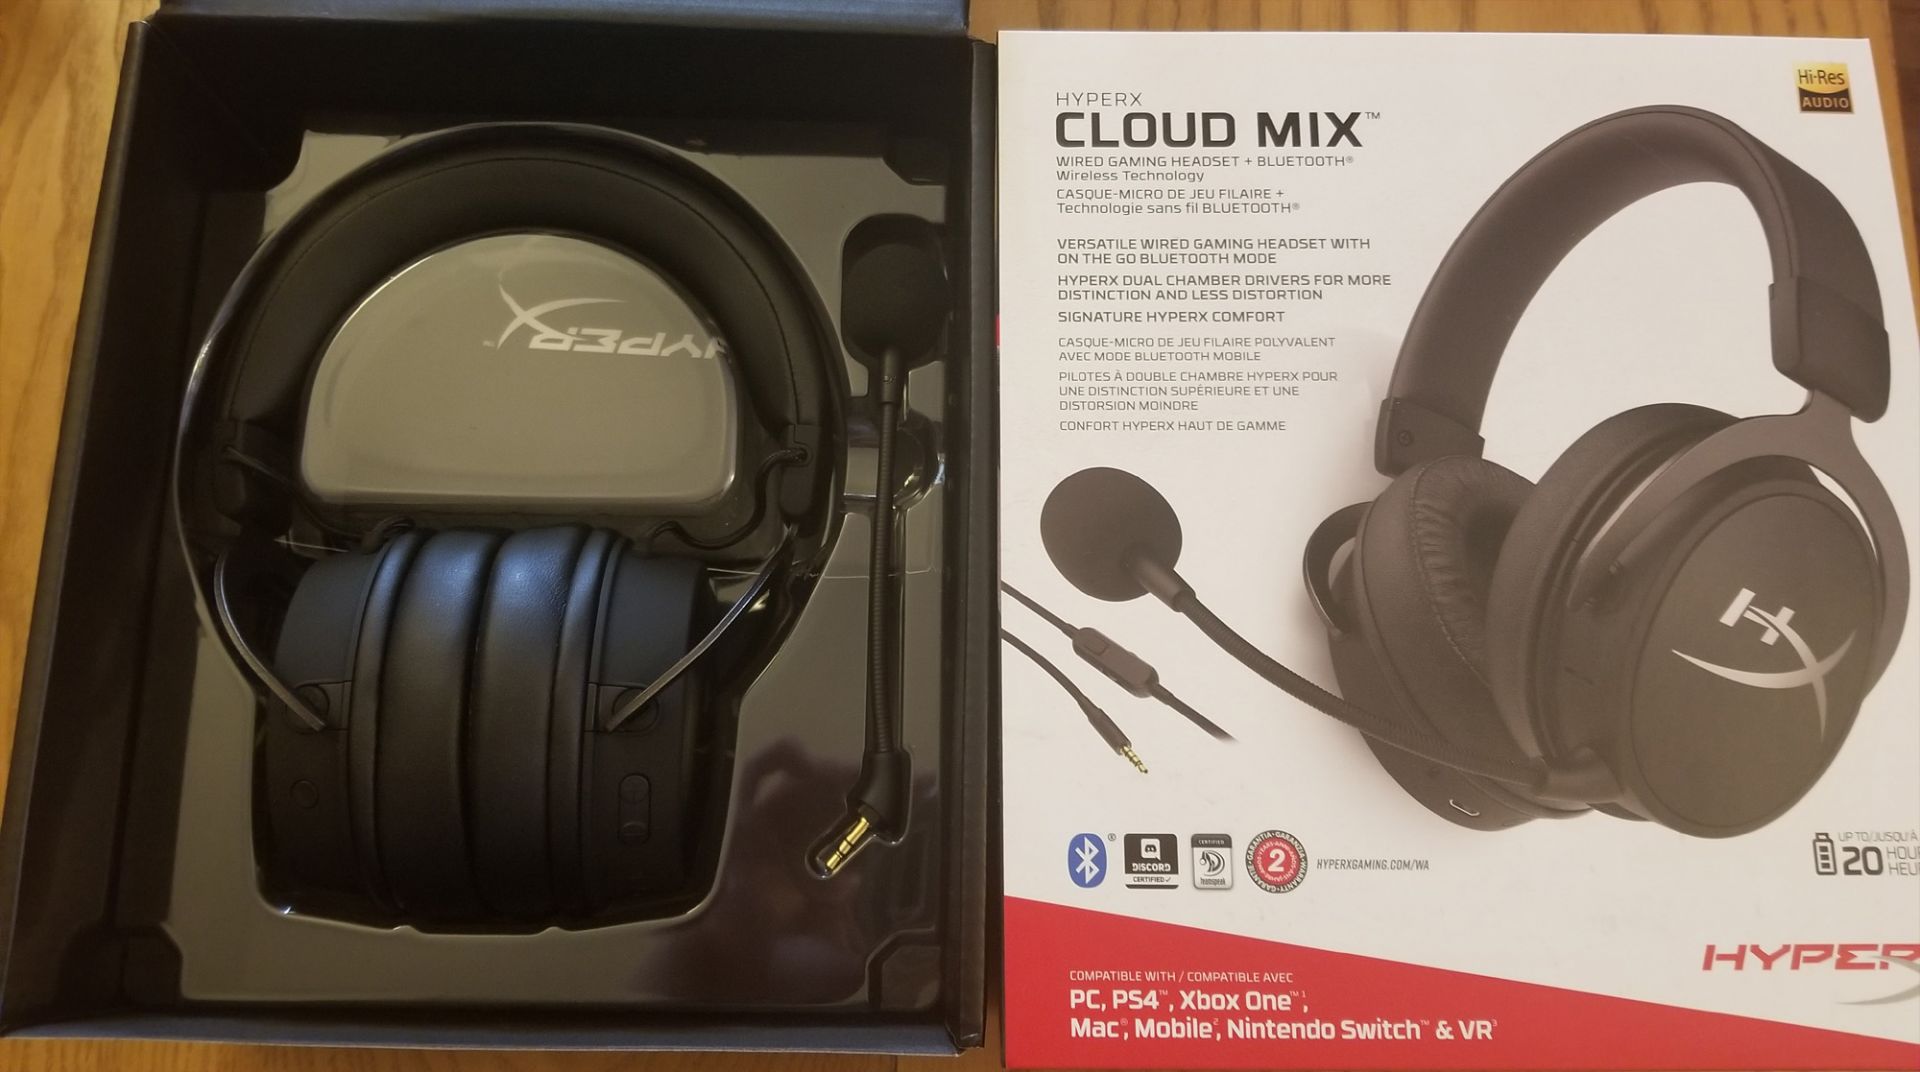 Co Optimus News Hyperx Cloud Mix Wired Gaming Headset Bluetooth Review